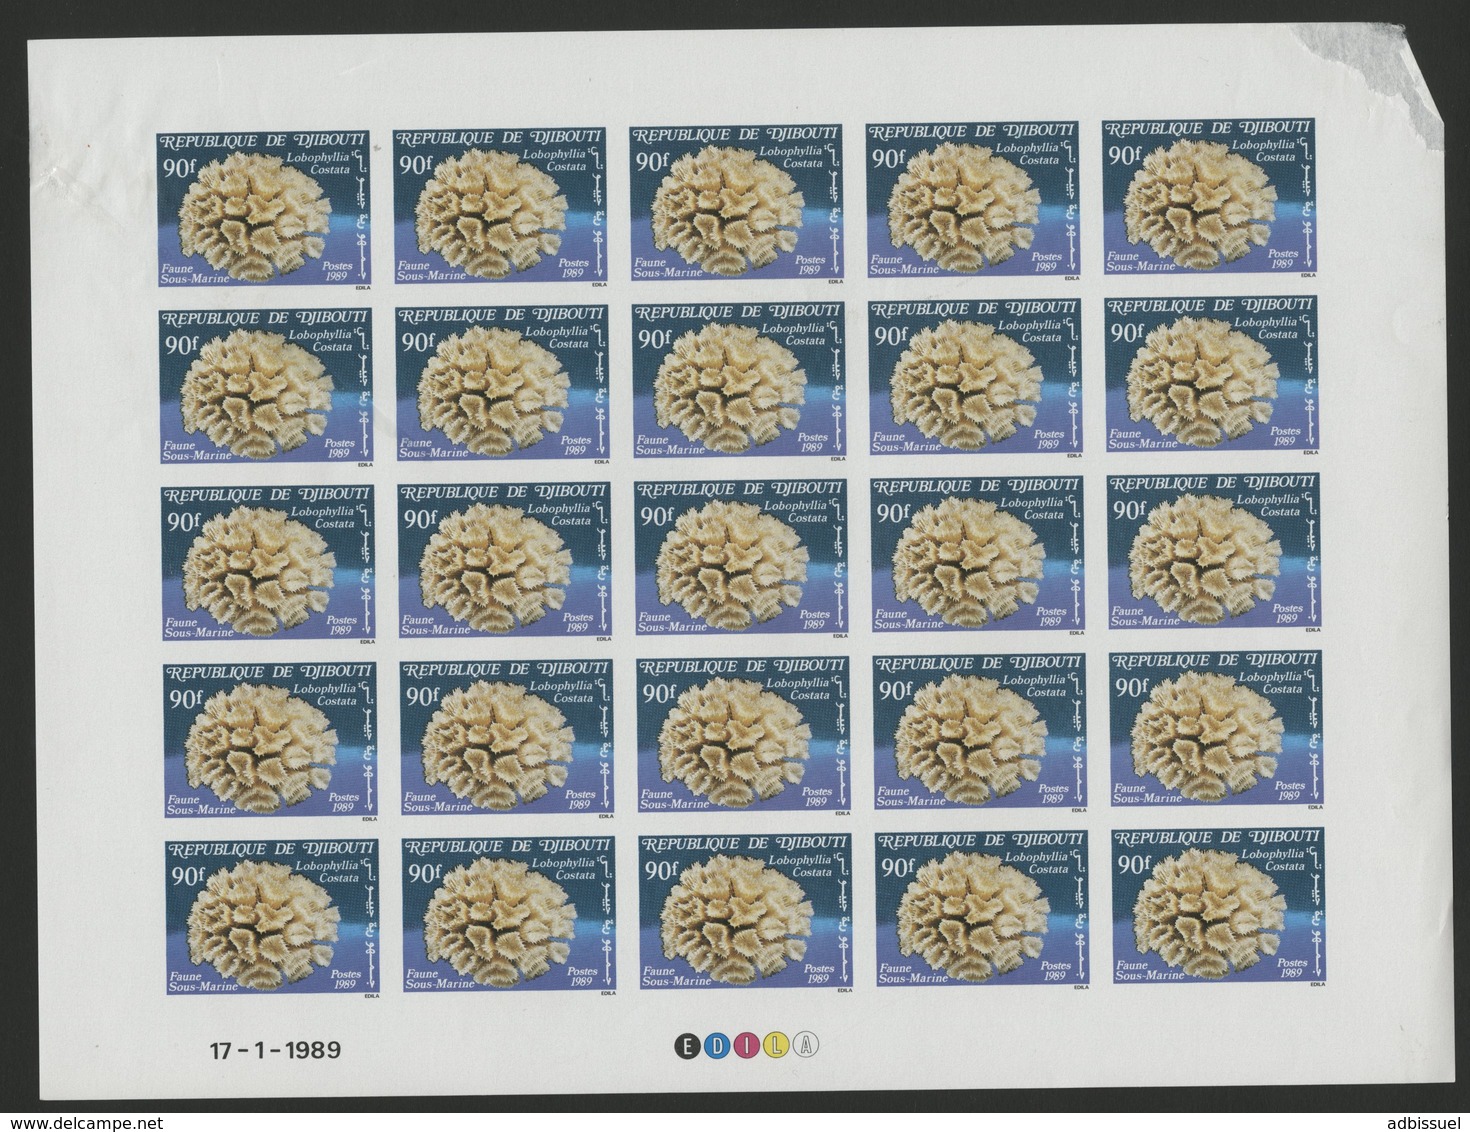 DJIBOUTI N° 647 FEUILLE COMPLETE DE 25 Ex. MNH ** Non Dentelés (imperforated) LABOPHYLLIA COSTATA Lobed Cactus Coral - Meereswelt